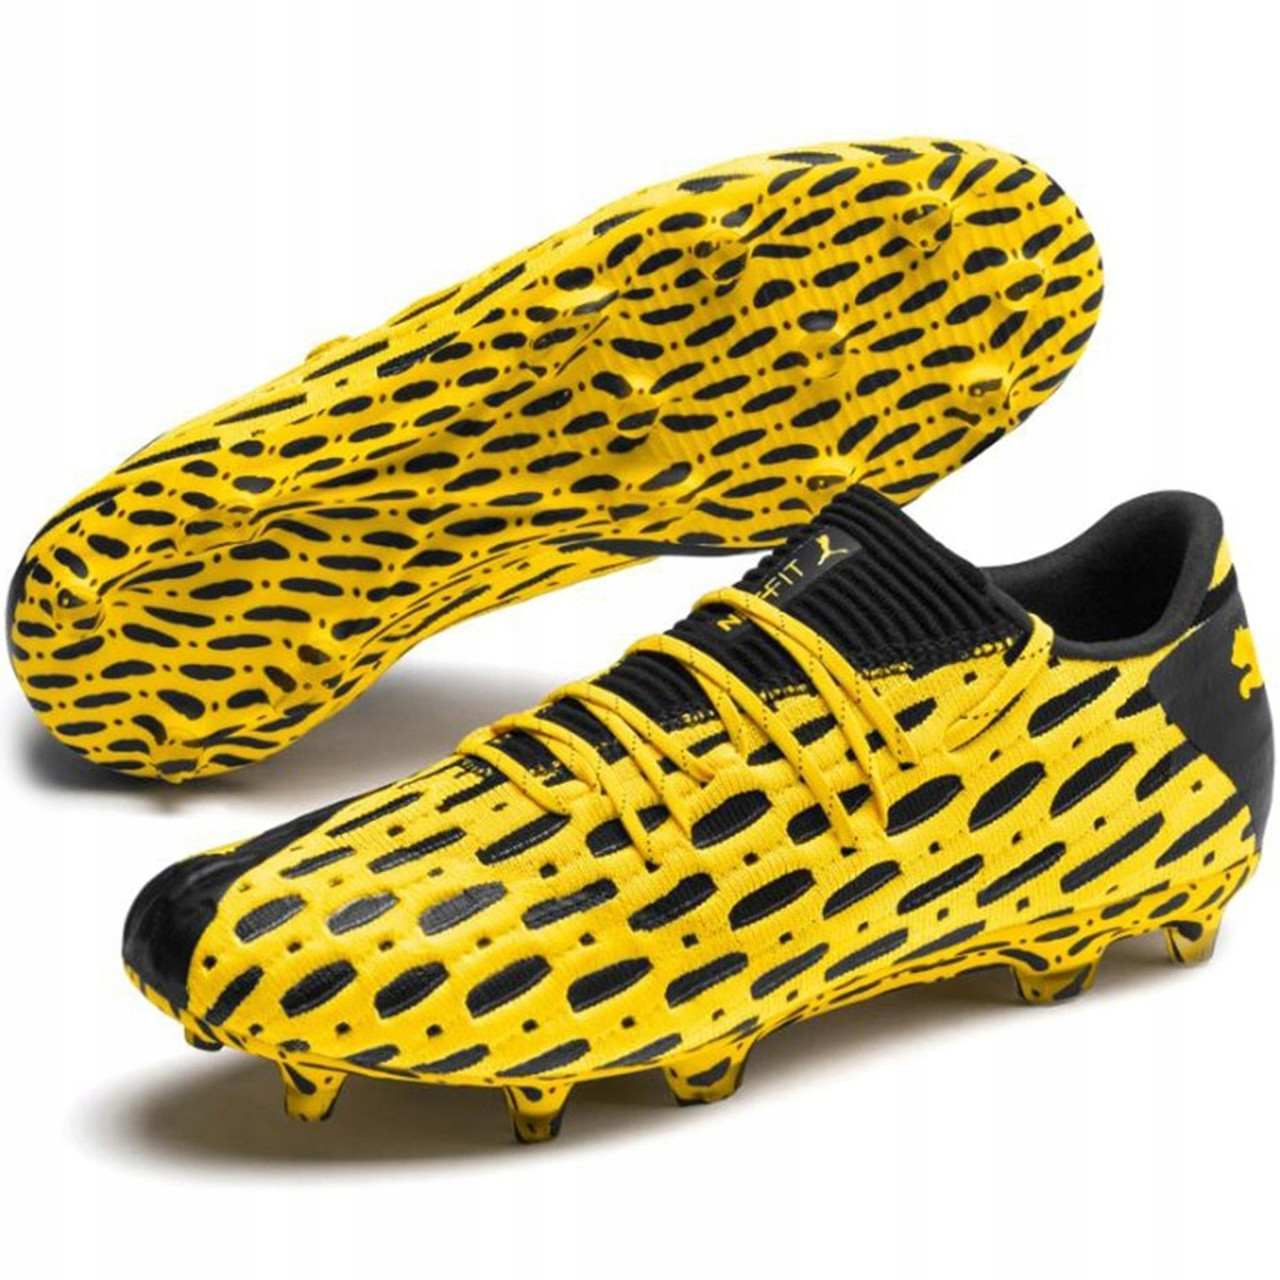 Puma Future 5 1 Netfit Low Firm Ground Soccer Cleats 02 Ultra Yellow Black Chicago Soccer